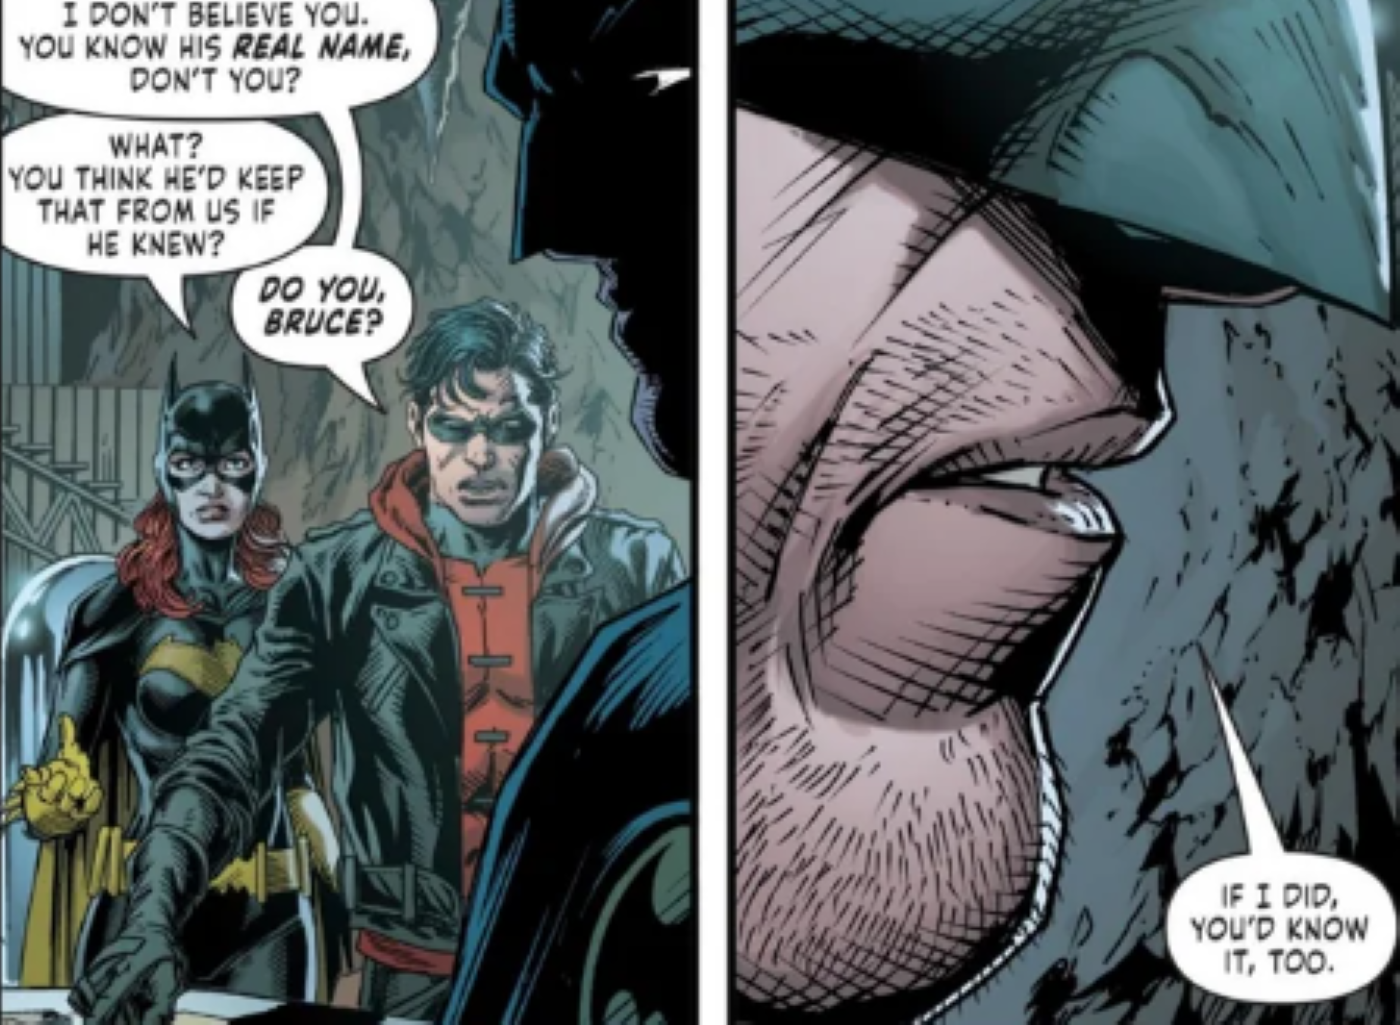 Red Hood yelling at Bruce asking if he knows who Joker is.